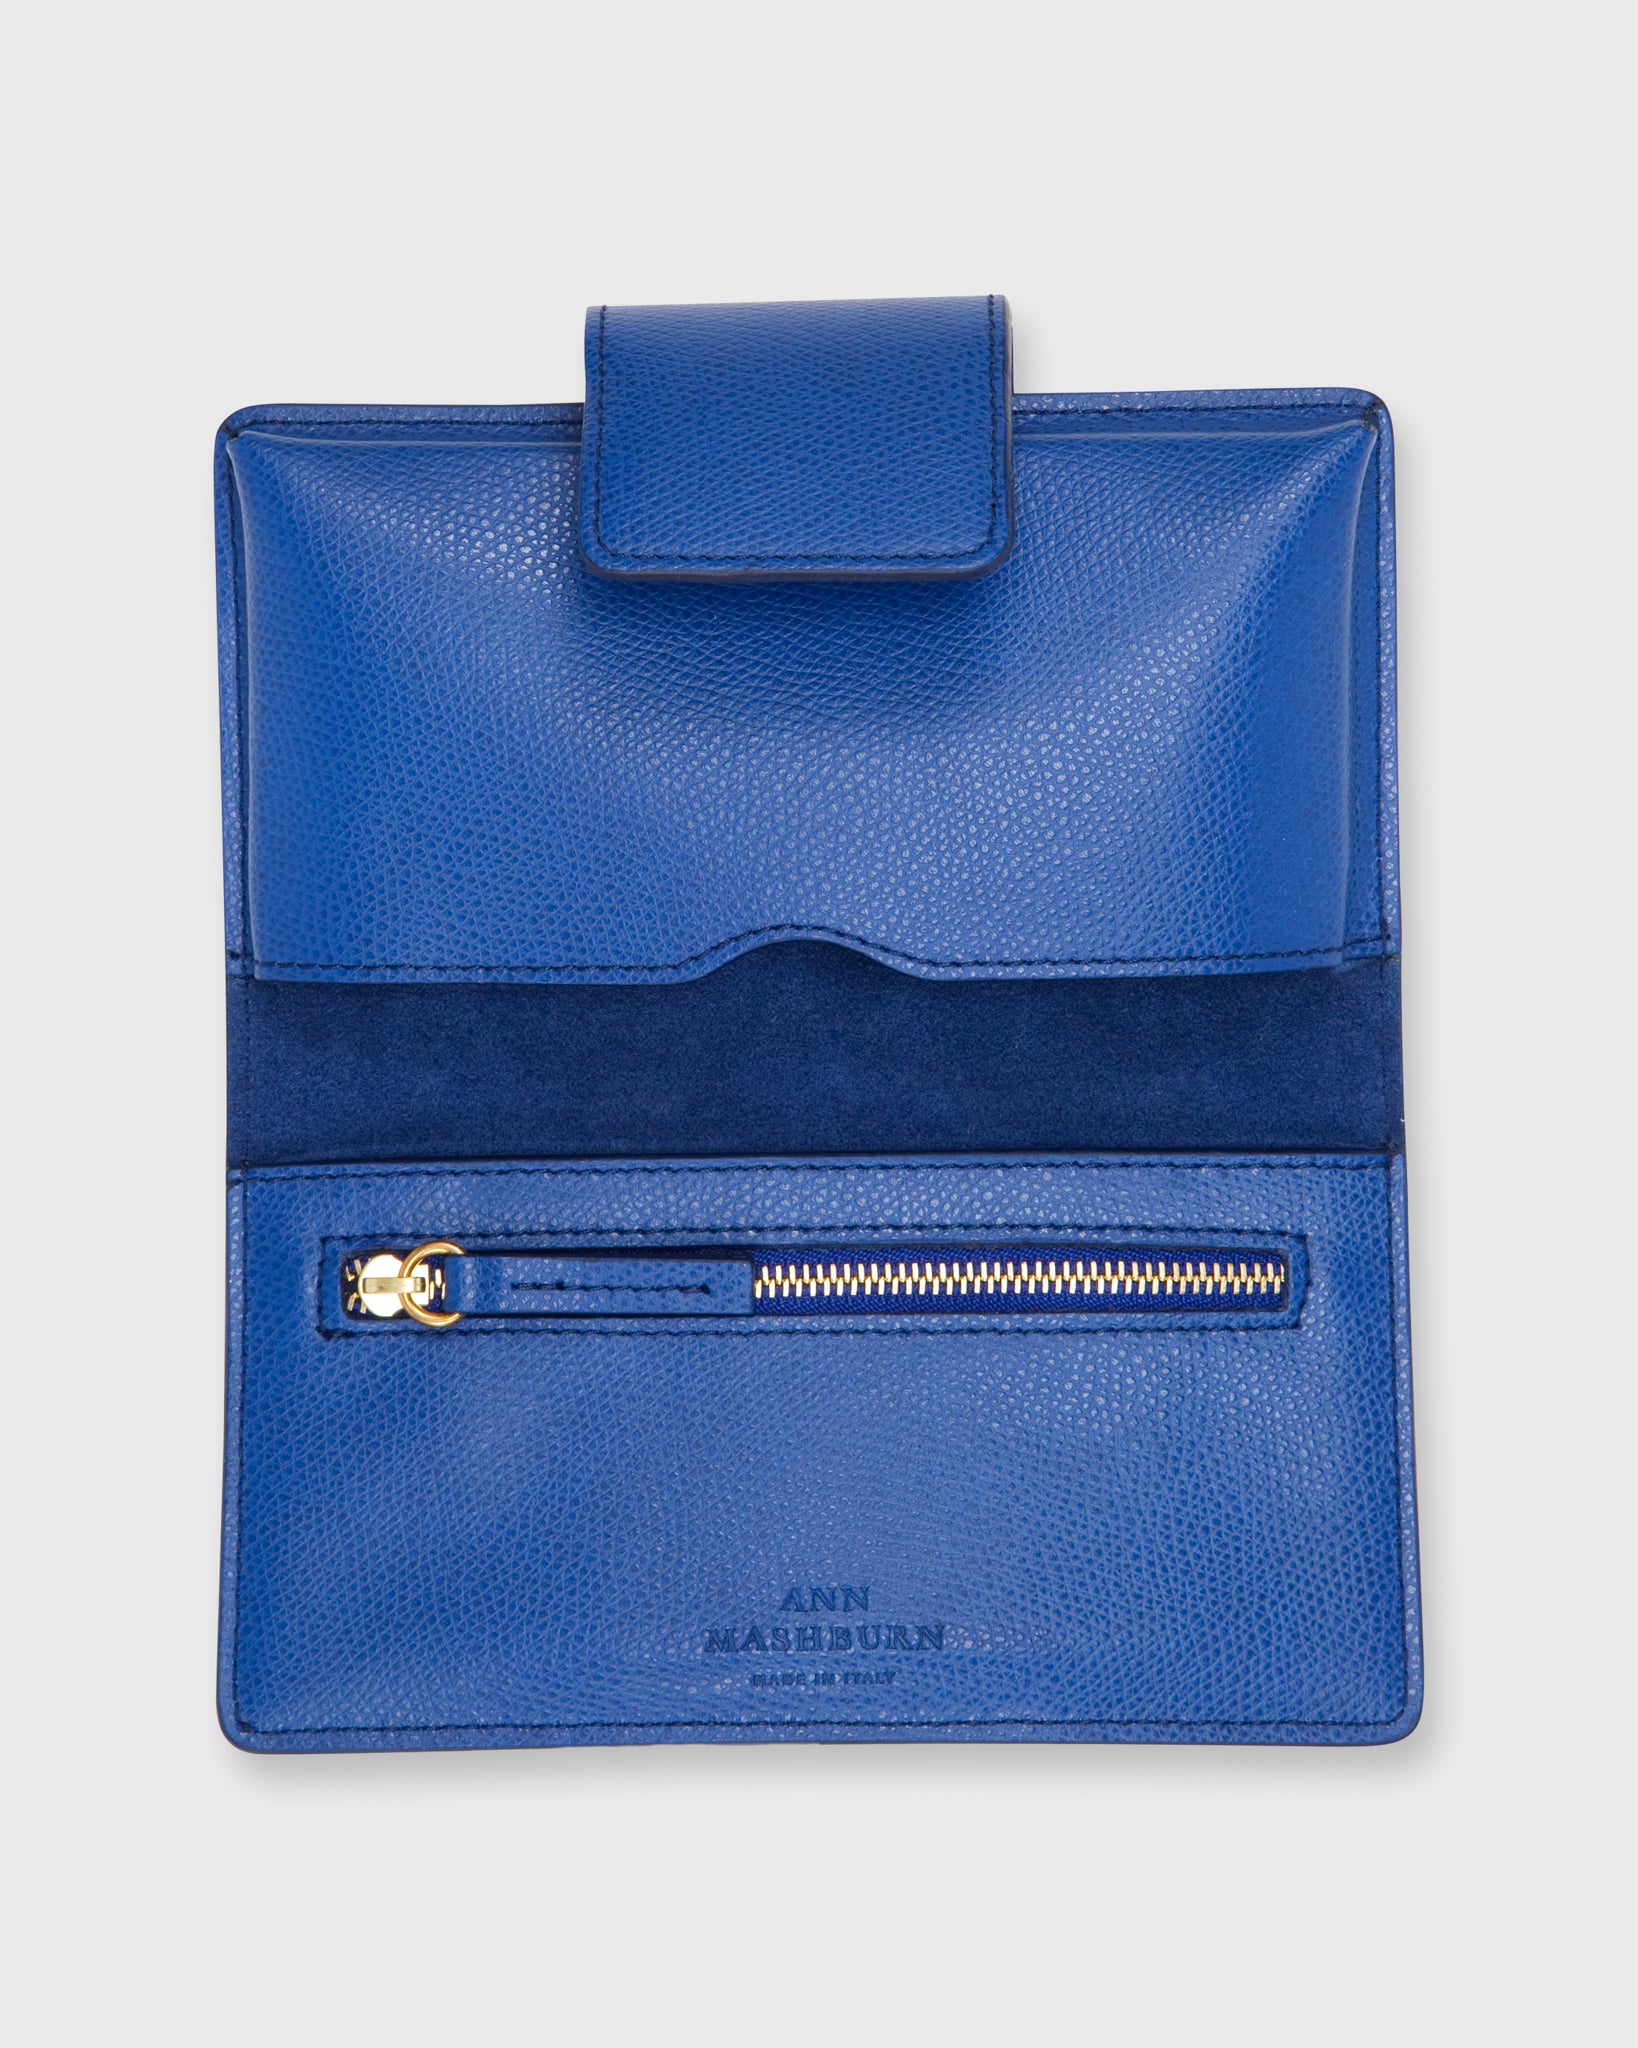 Small Phone Wallet Clutch in Cobalt Leather